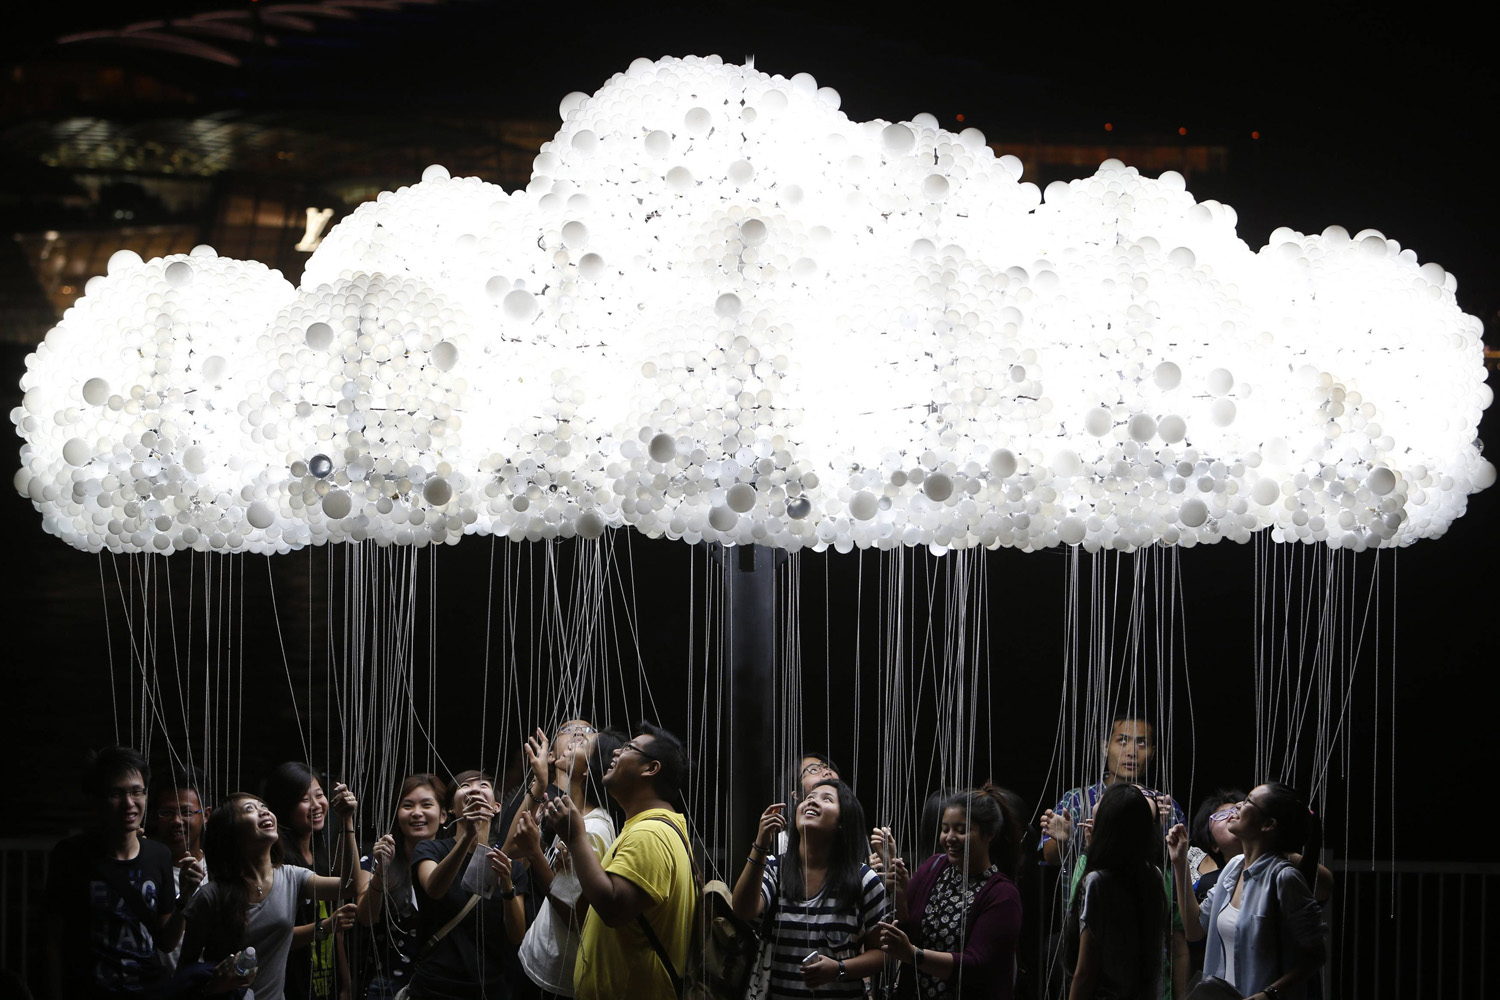 A group of people pose for pictures with light installation "CLOUD" in Singapore